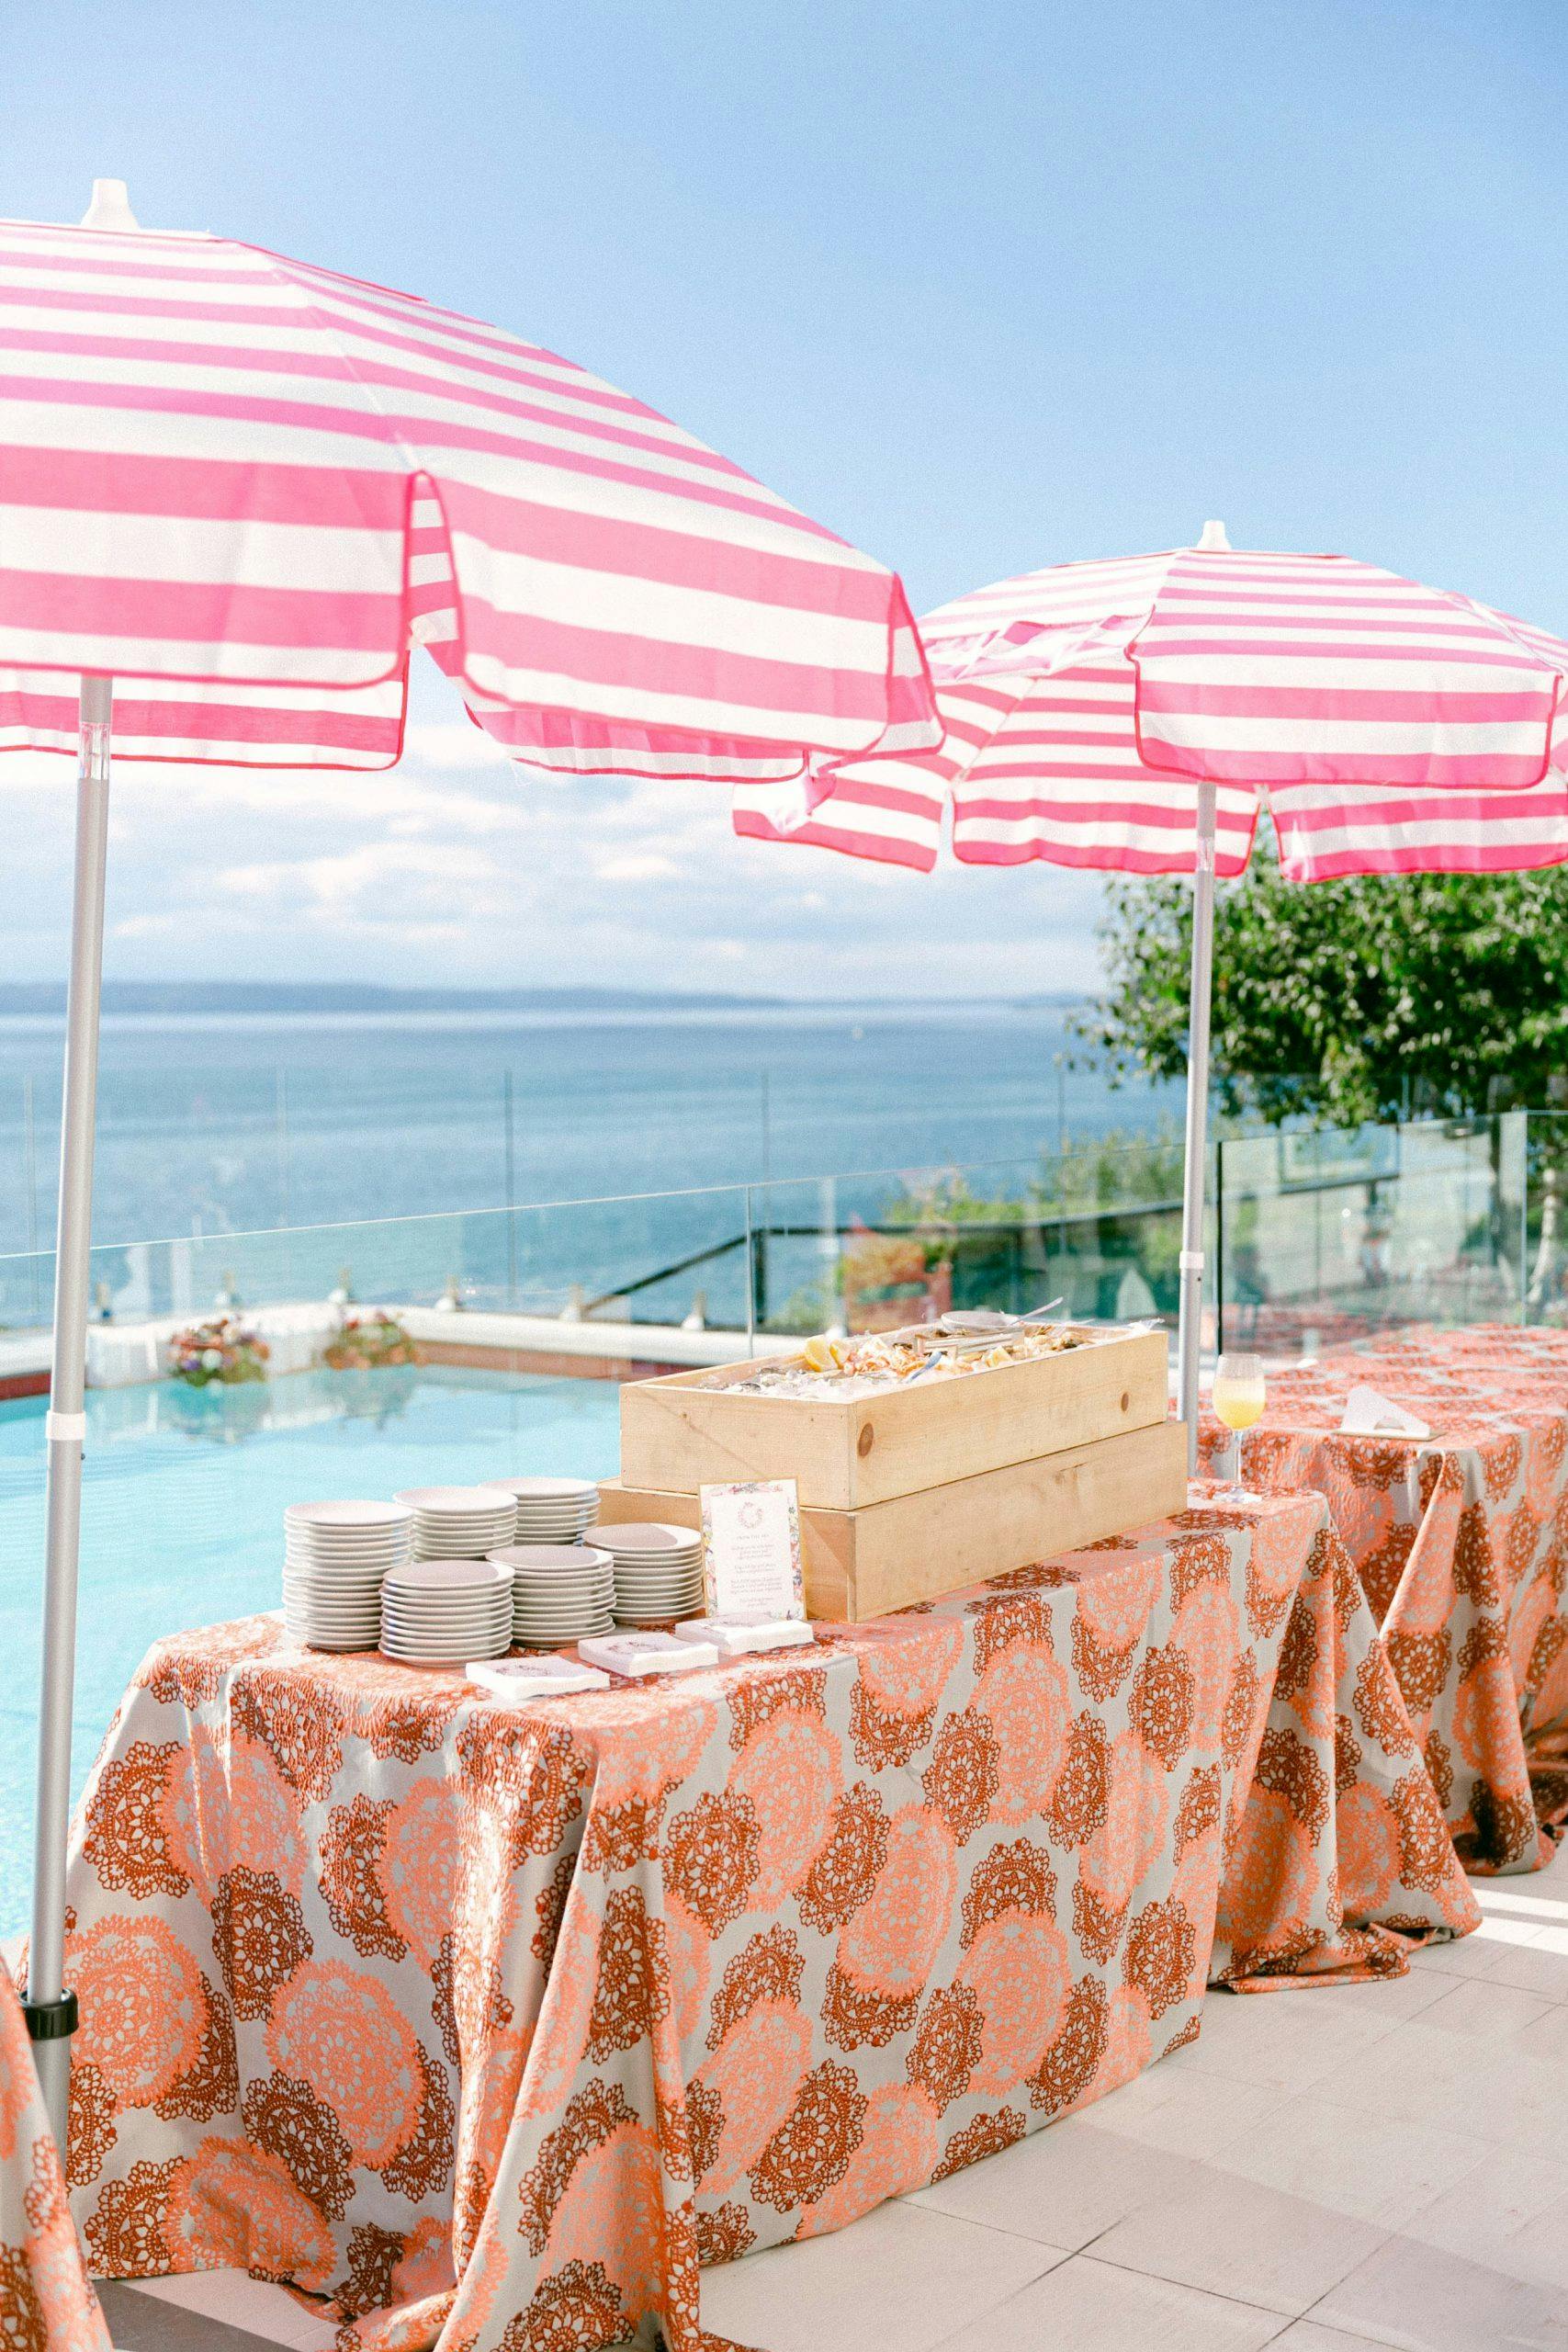 24 Small Birthday Party Ideas You Won't Find Anywhere Else